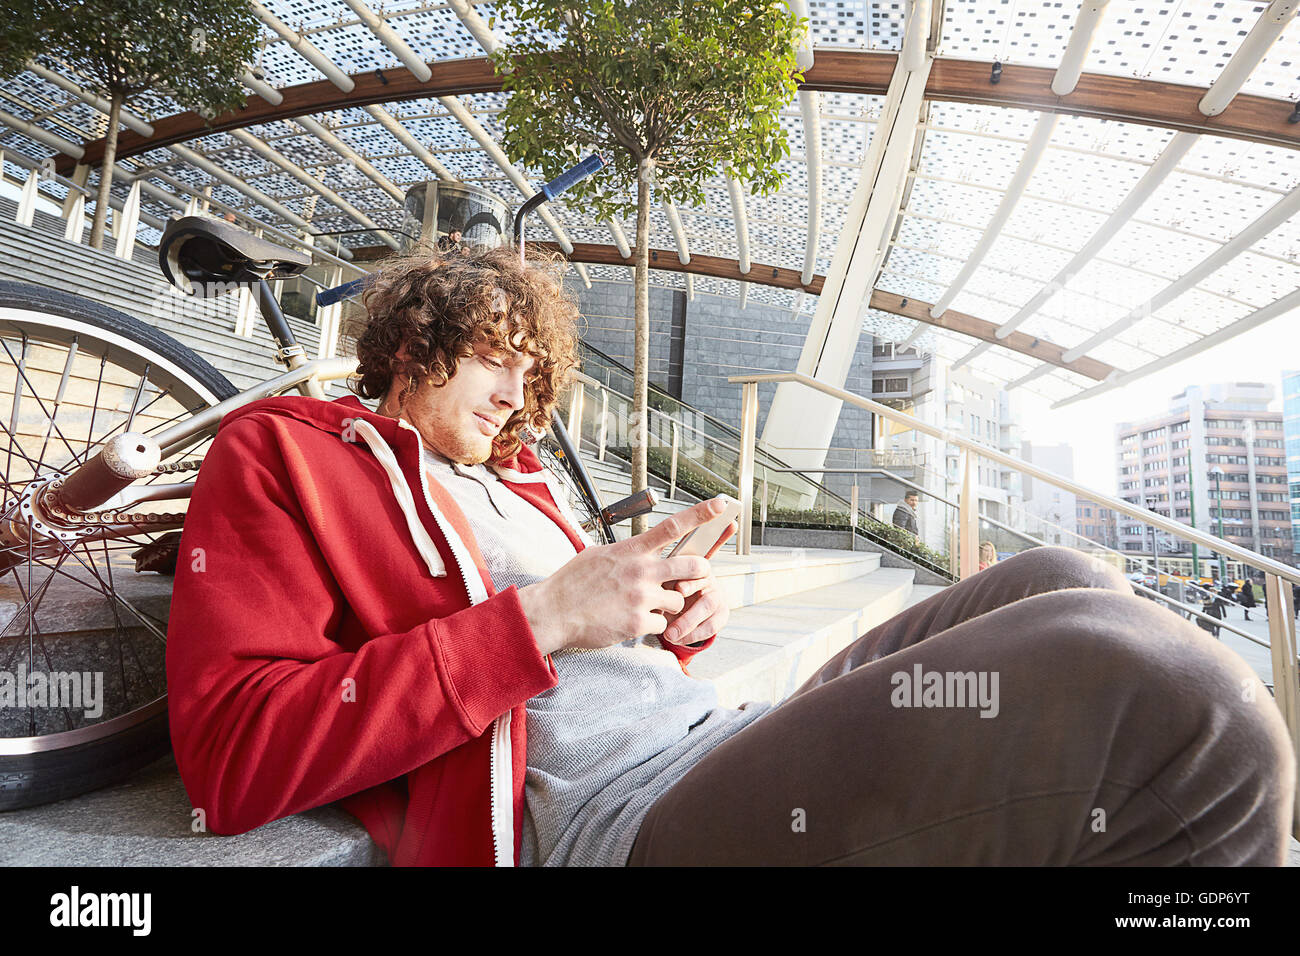 Man sitting on steps with BMX using smartphone Stock Photo